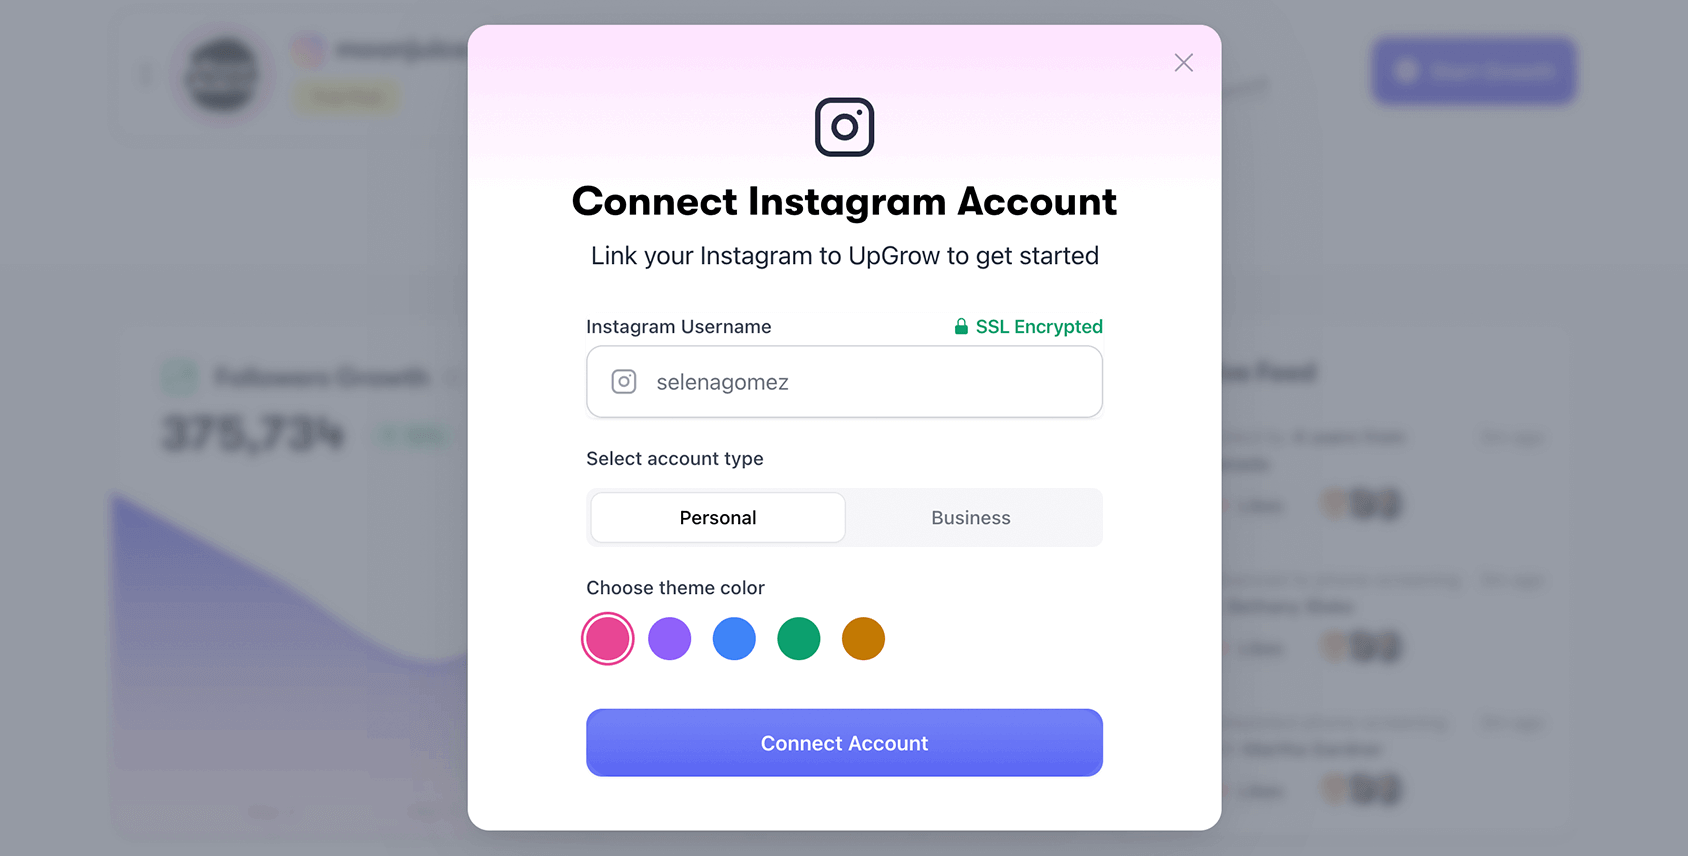 Experience worry-free Instagram-compliant growth without any risk.